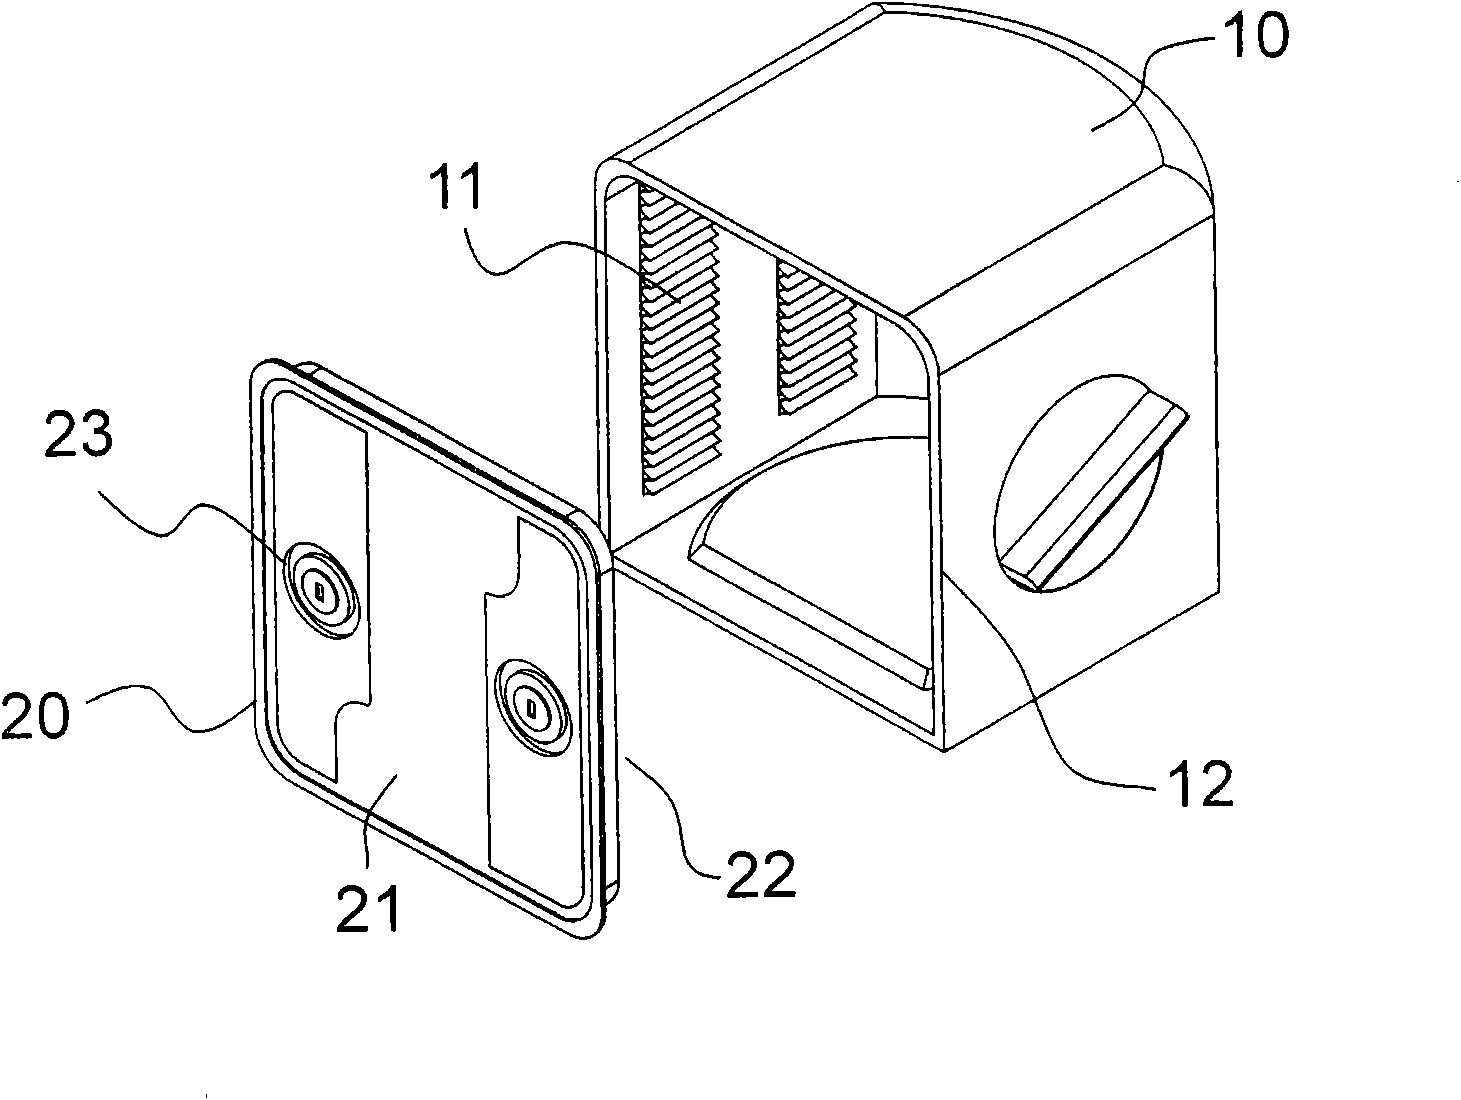 Front-opened cassette configured with inflatable strutting piece modules